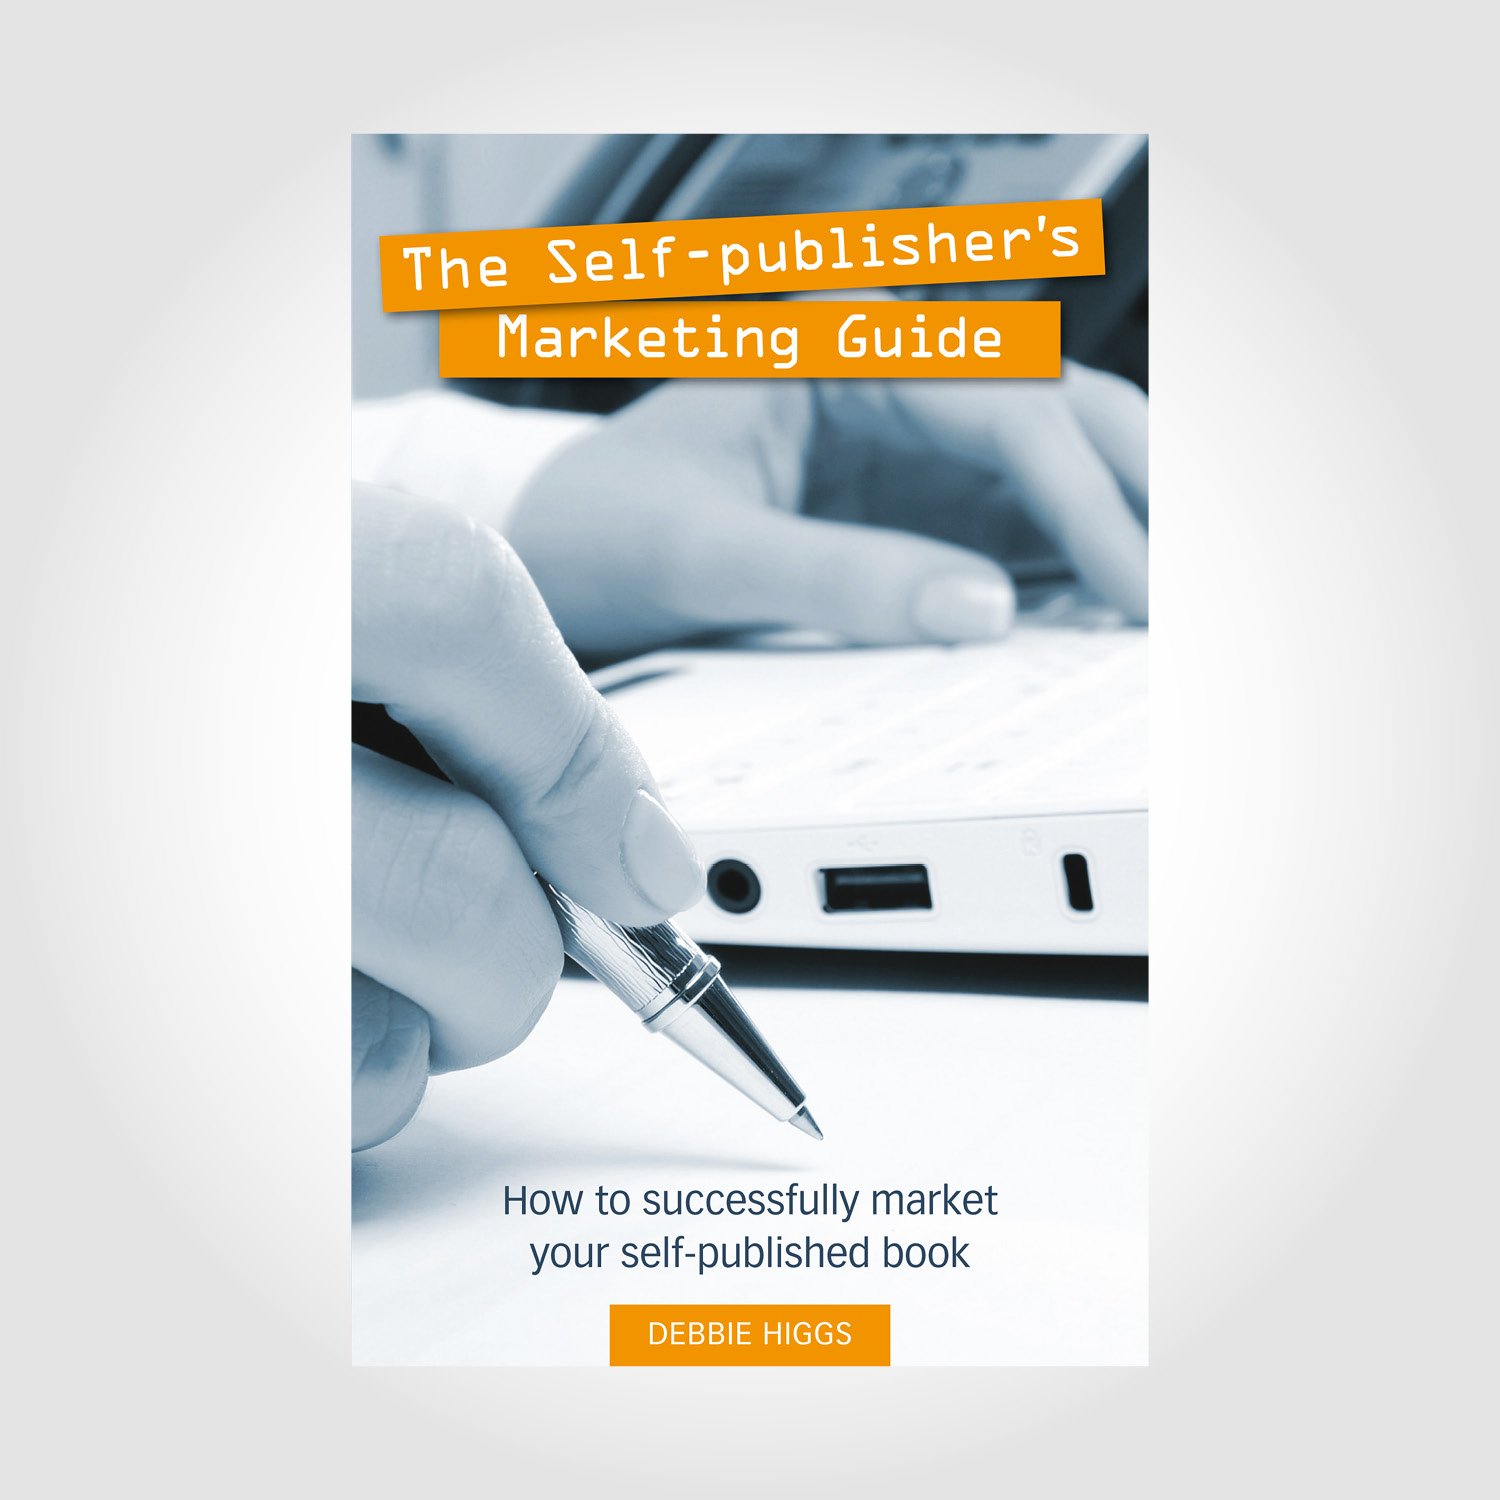 The Self-publisher’s Marketing Guide